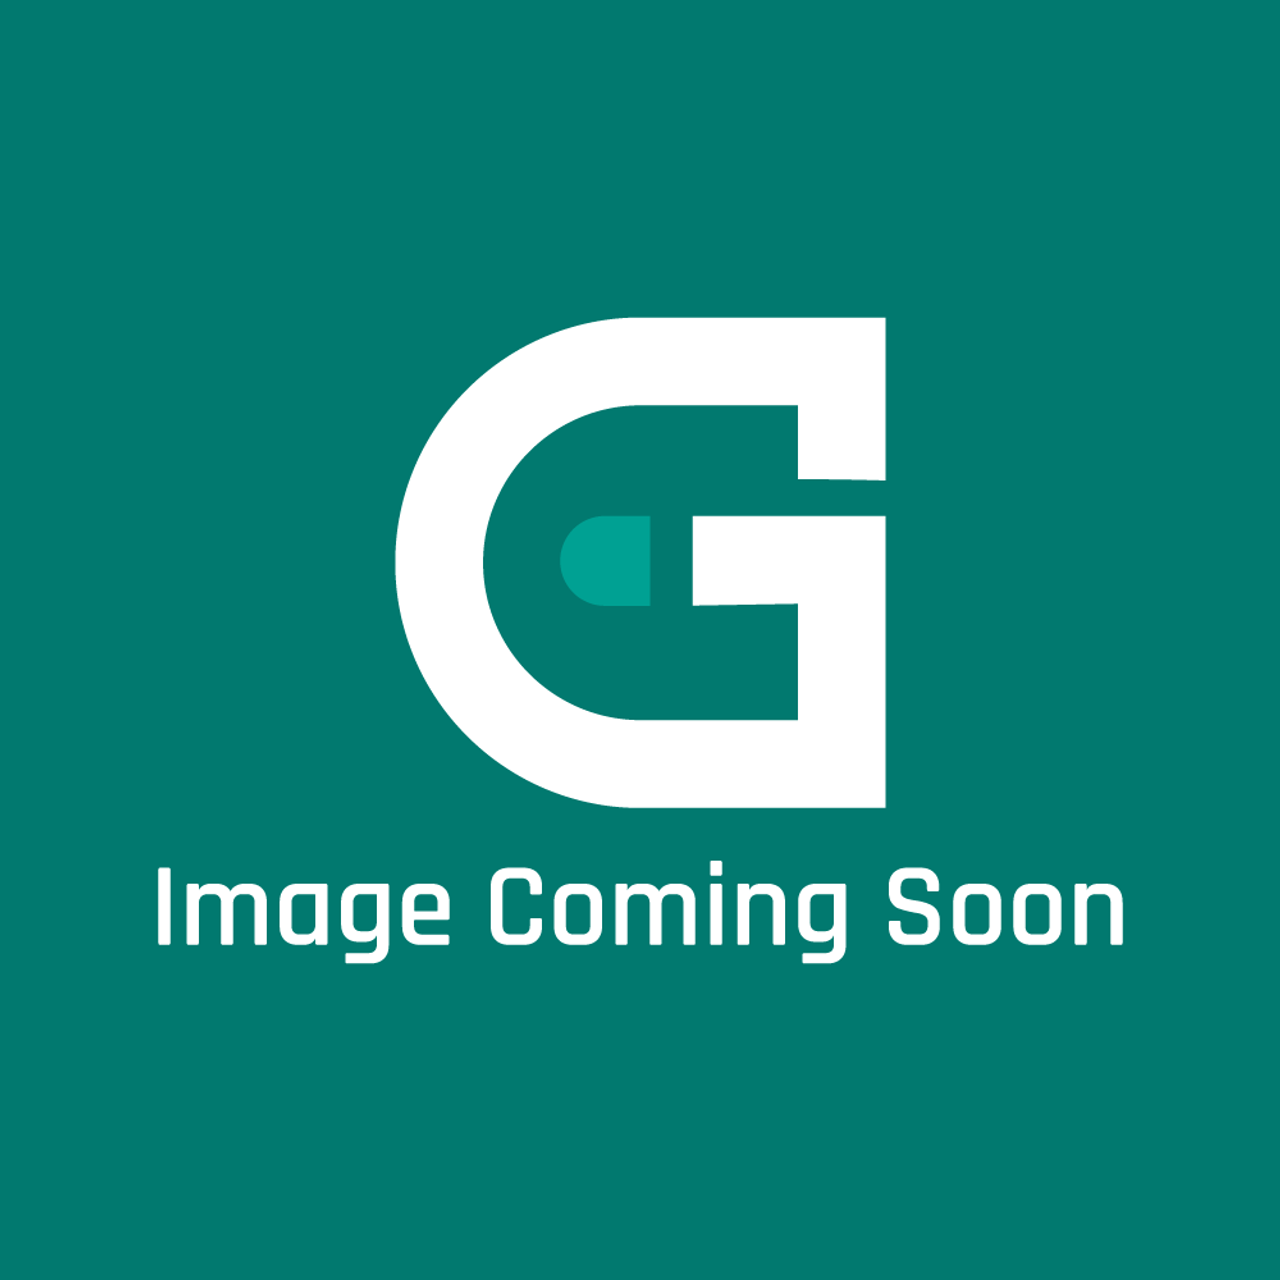 GE Appliances WB13X34741 - Ignition Module Kit - Image Coming Soon!